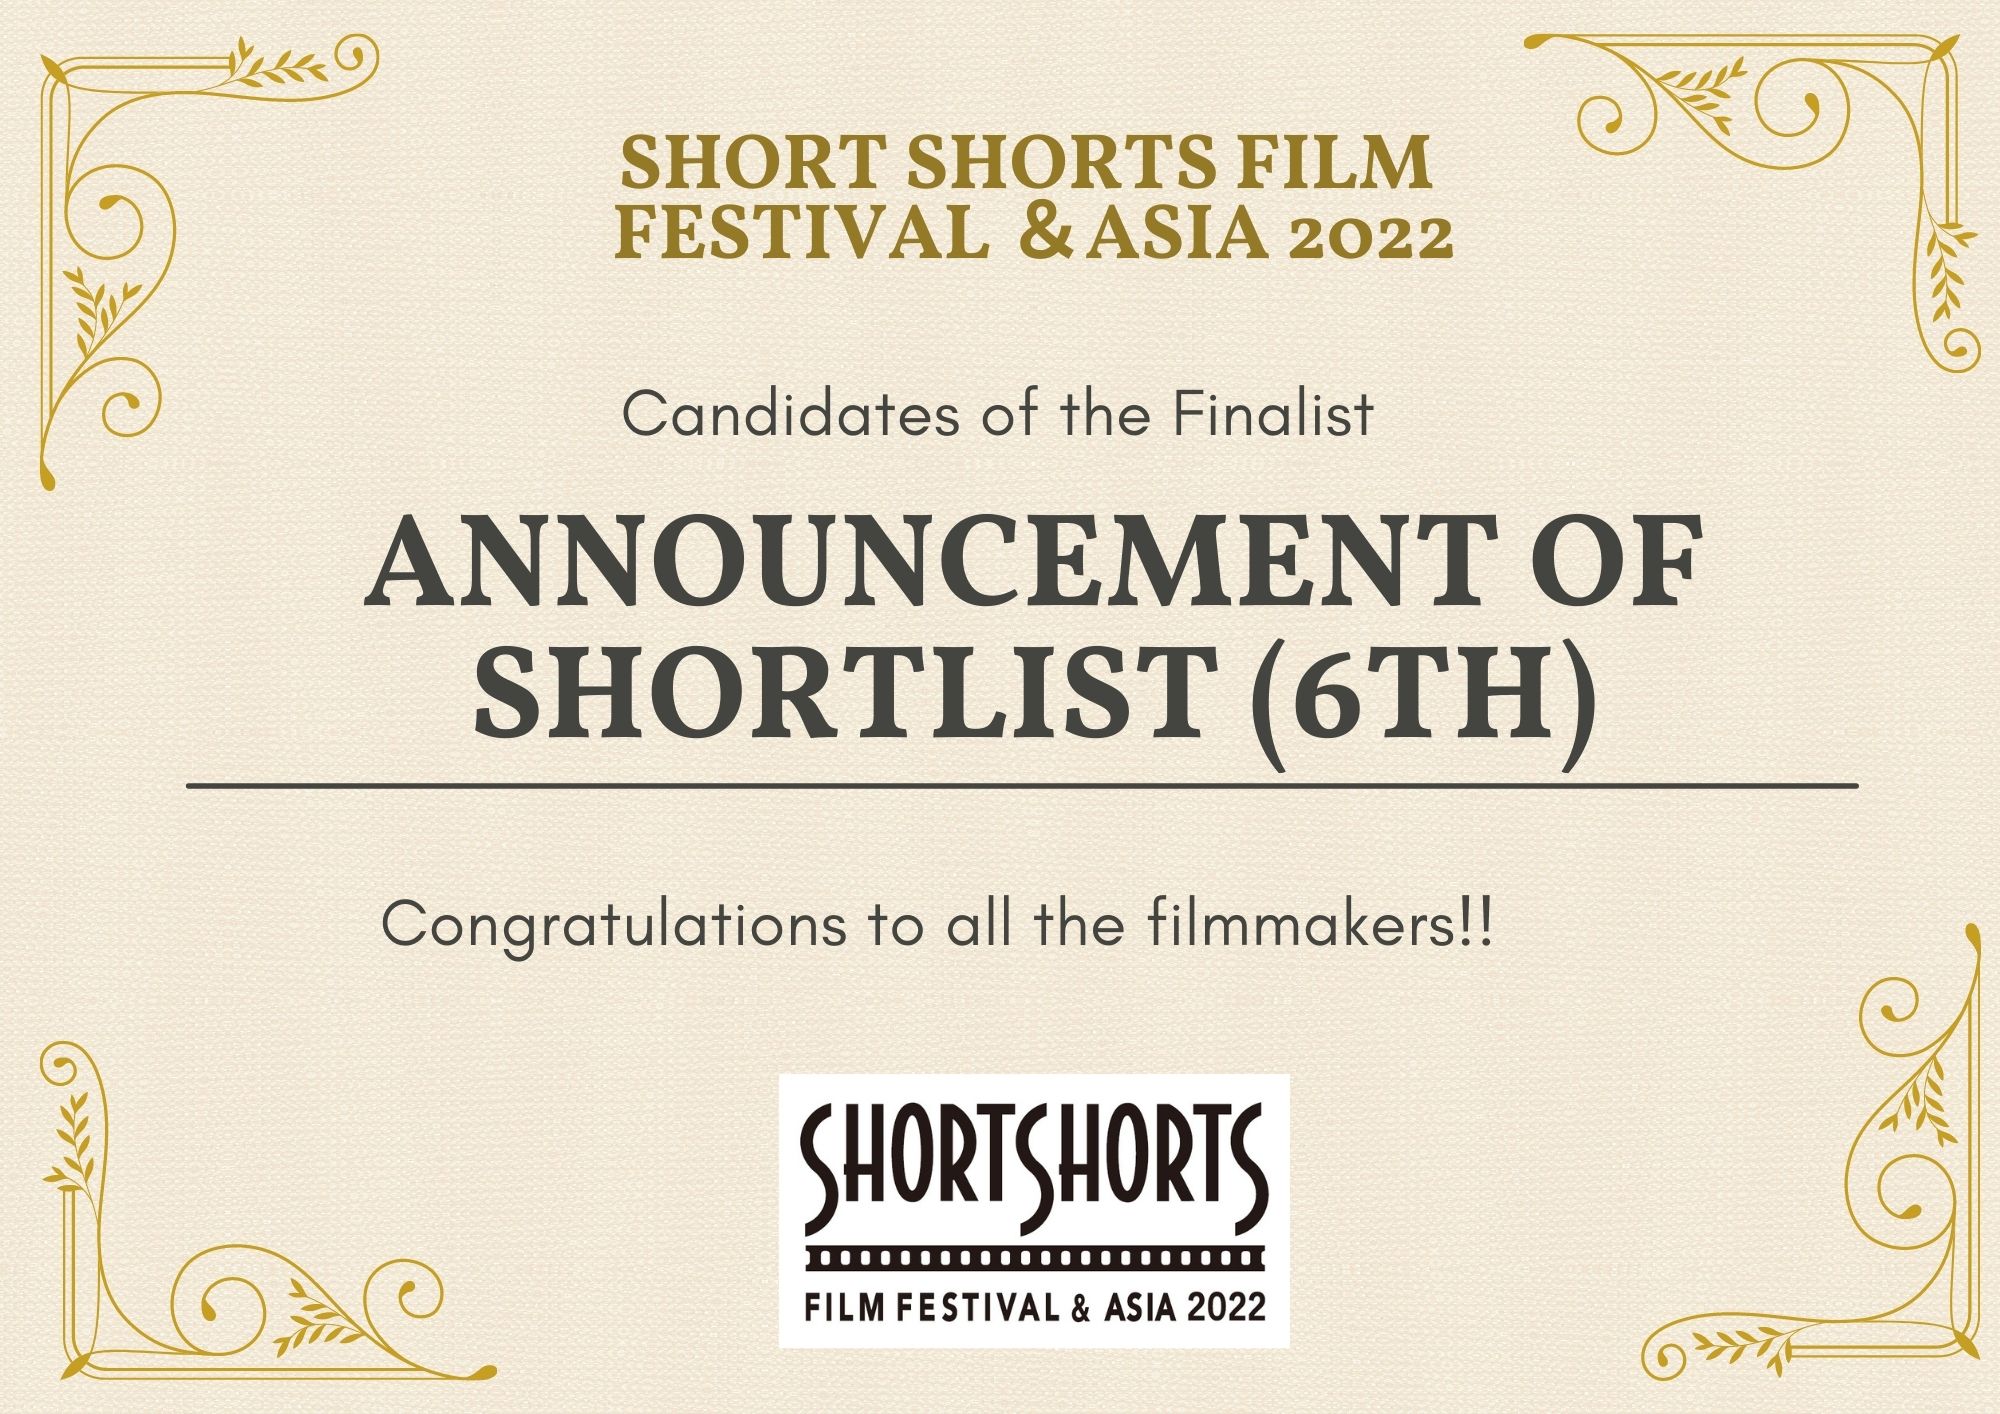 Announcement of BRANDED SHORTS 2022 shortlist (7th